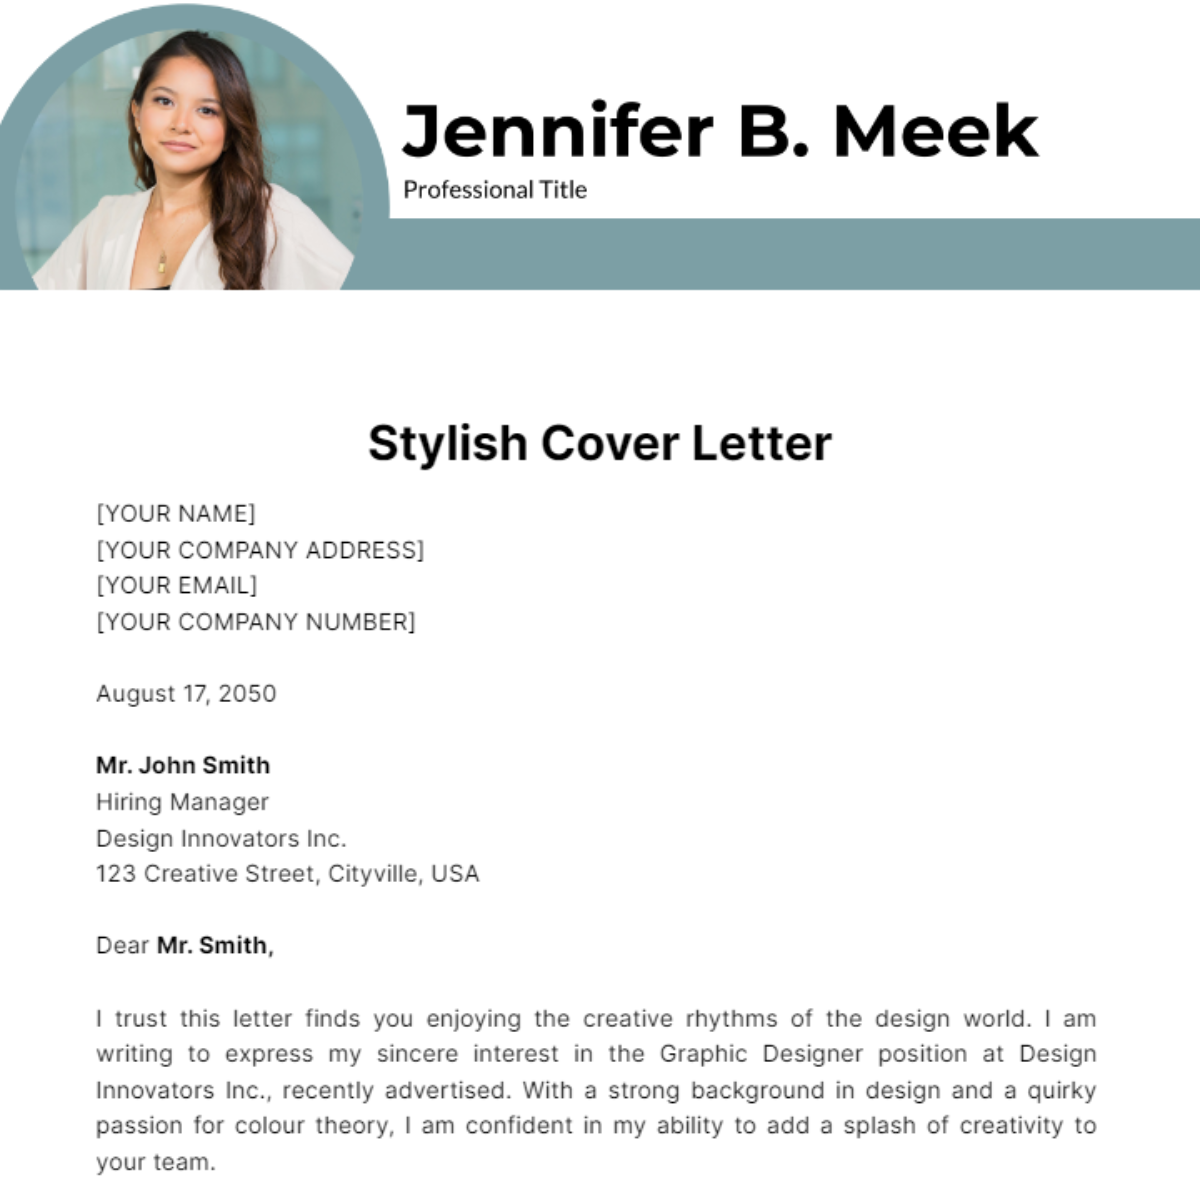 Stylish Cover Letter Template